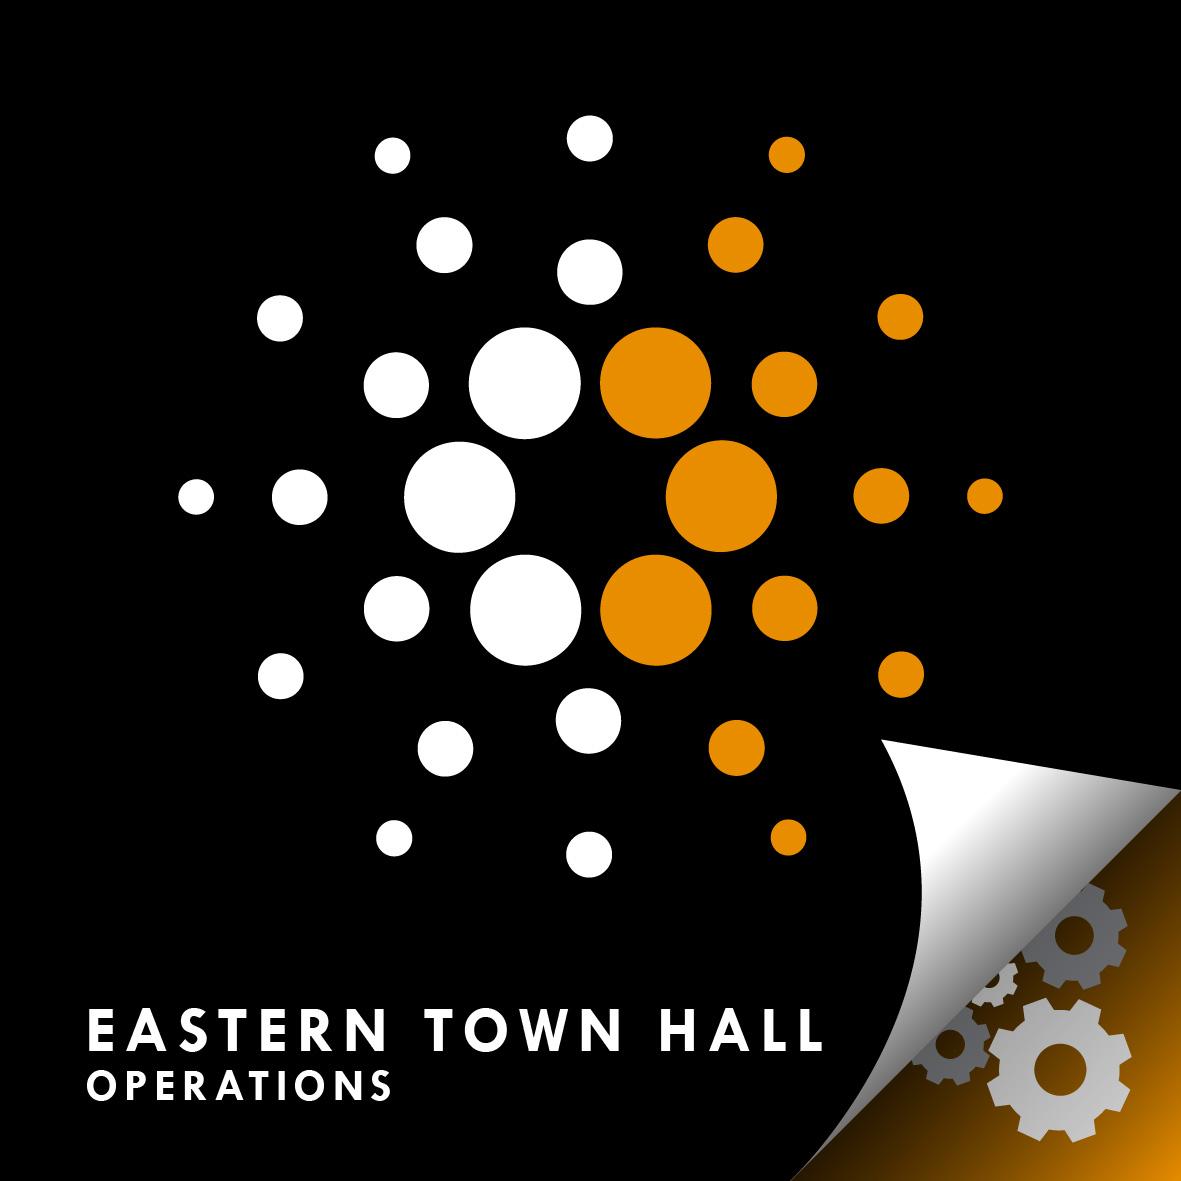 This image represents the continuation of Eastern Town Hall operations. An effort to onboard citizens in the Asiana and Oceania countries onto Cardano.